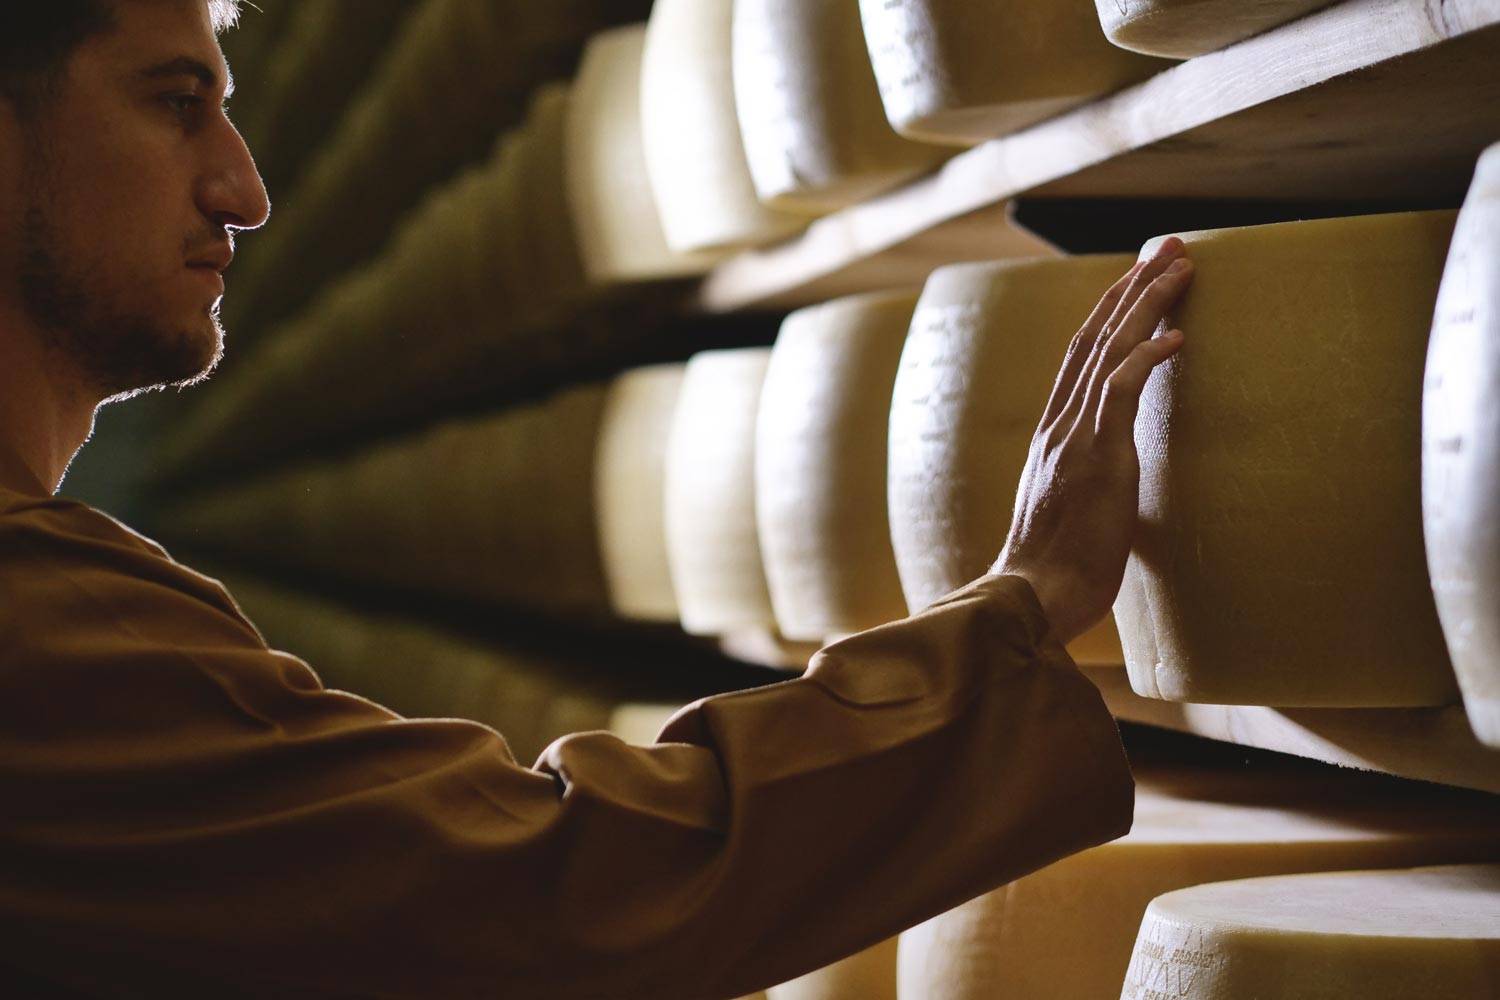 Cheese Makers Traveling Through Italy